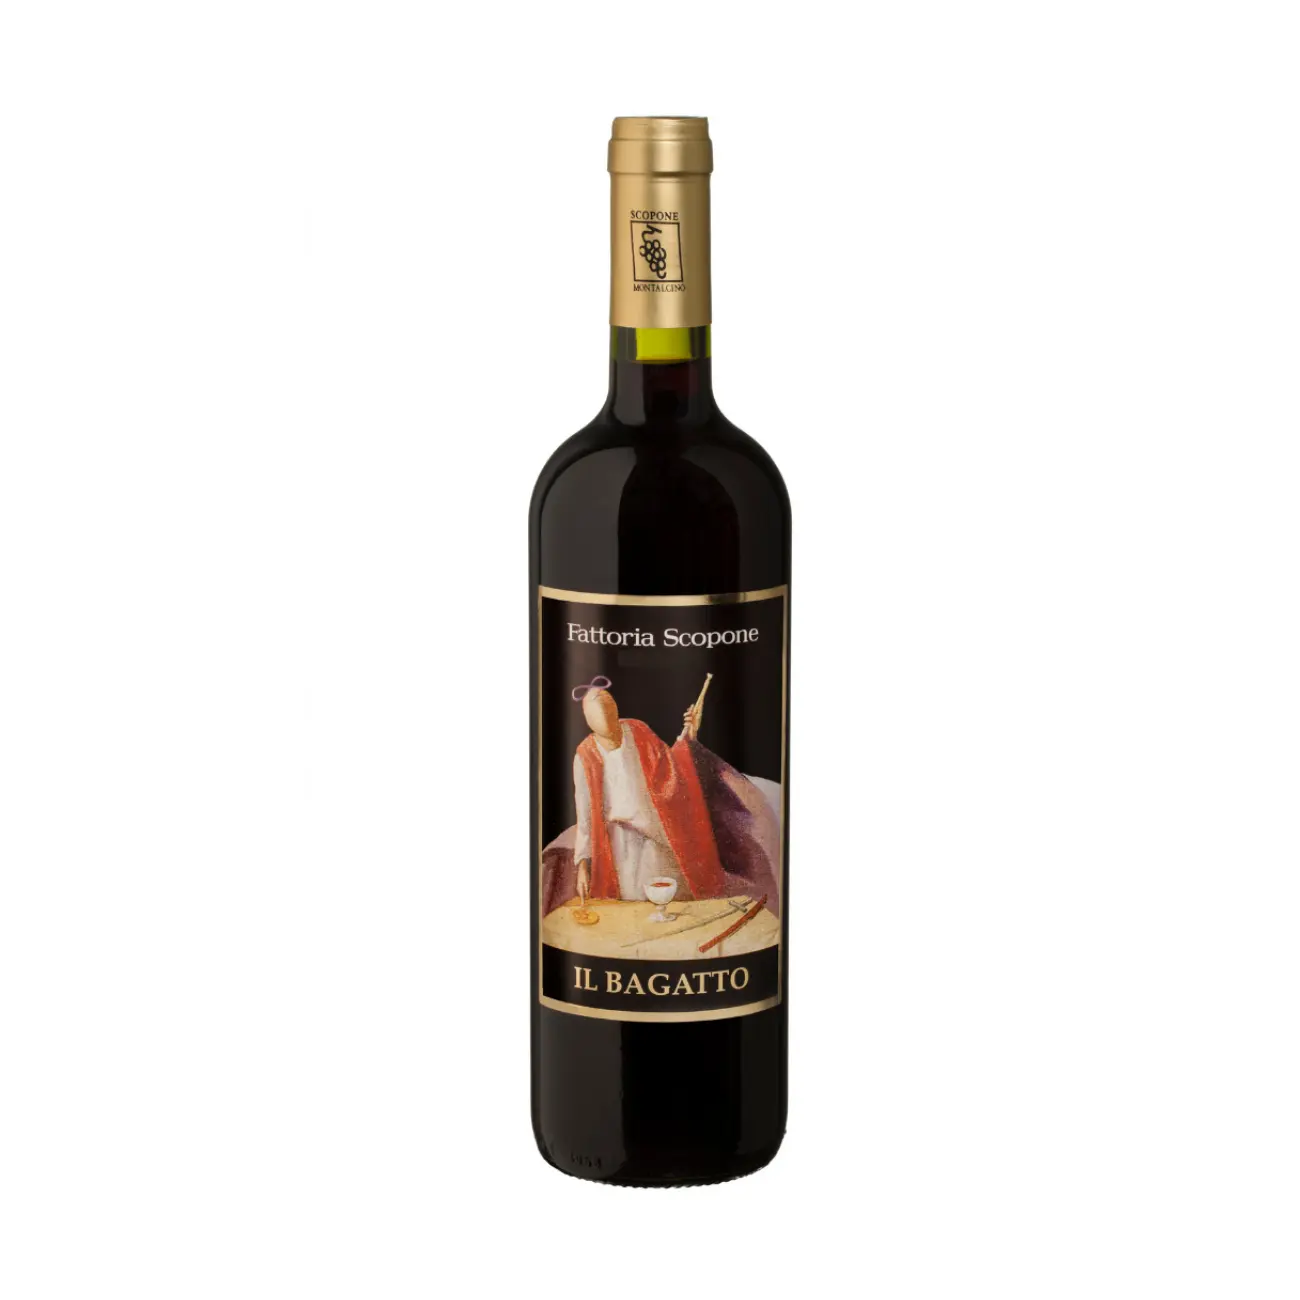 HOT SALE ITALIAN RED WINE IGT IL BAGATTO 2012 TOP QUALITY ITALIAN RED WINES